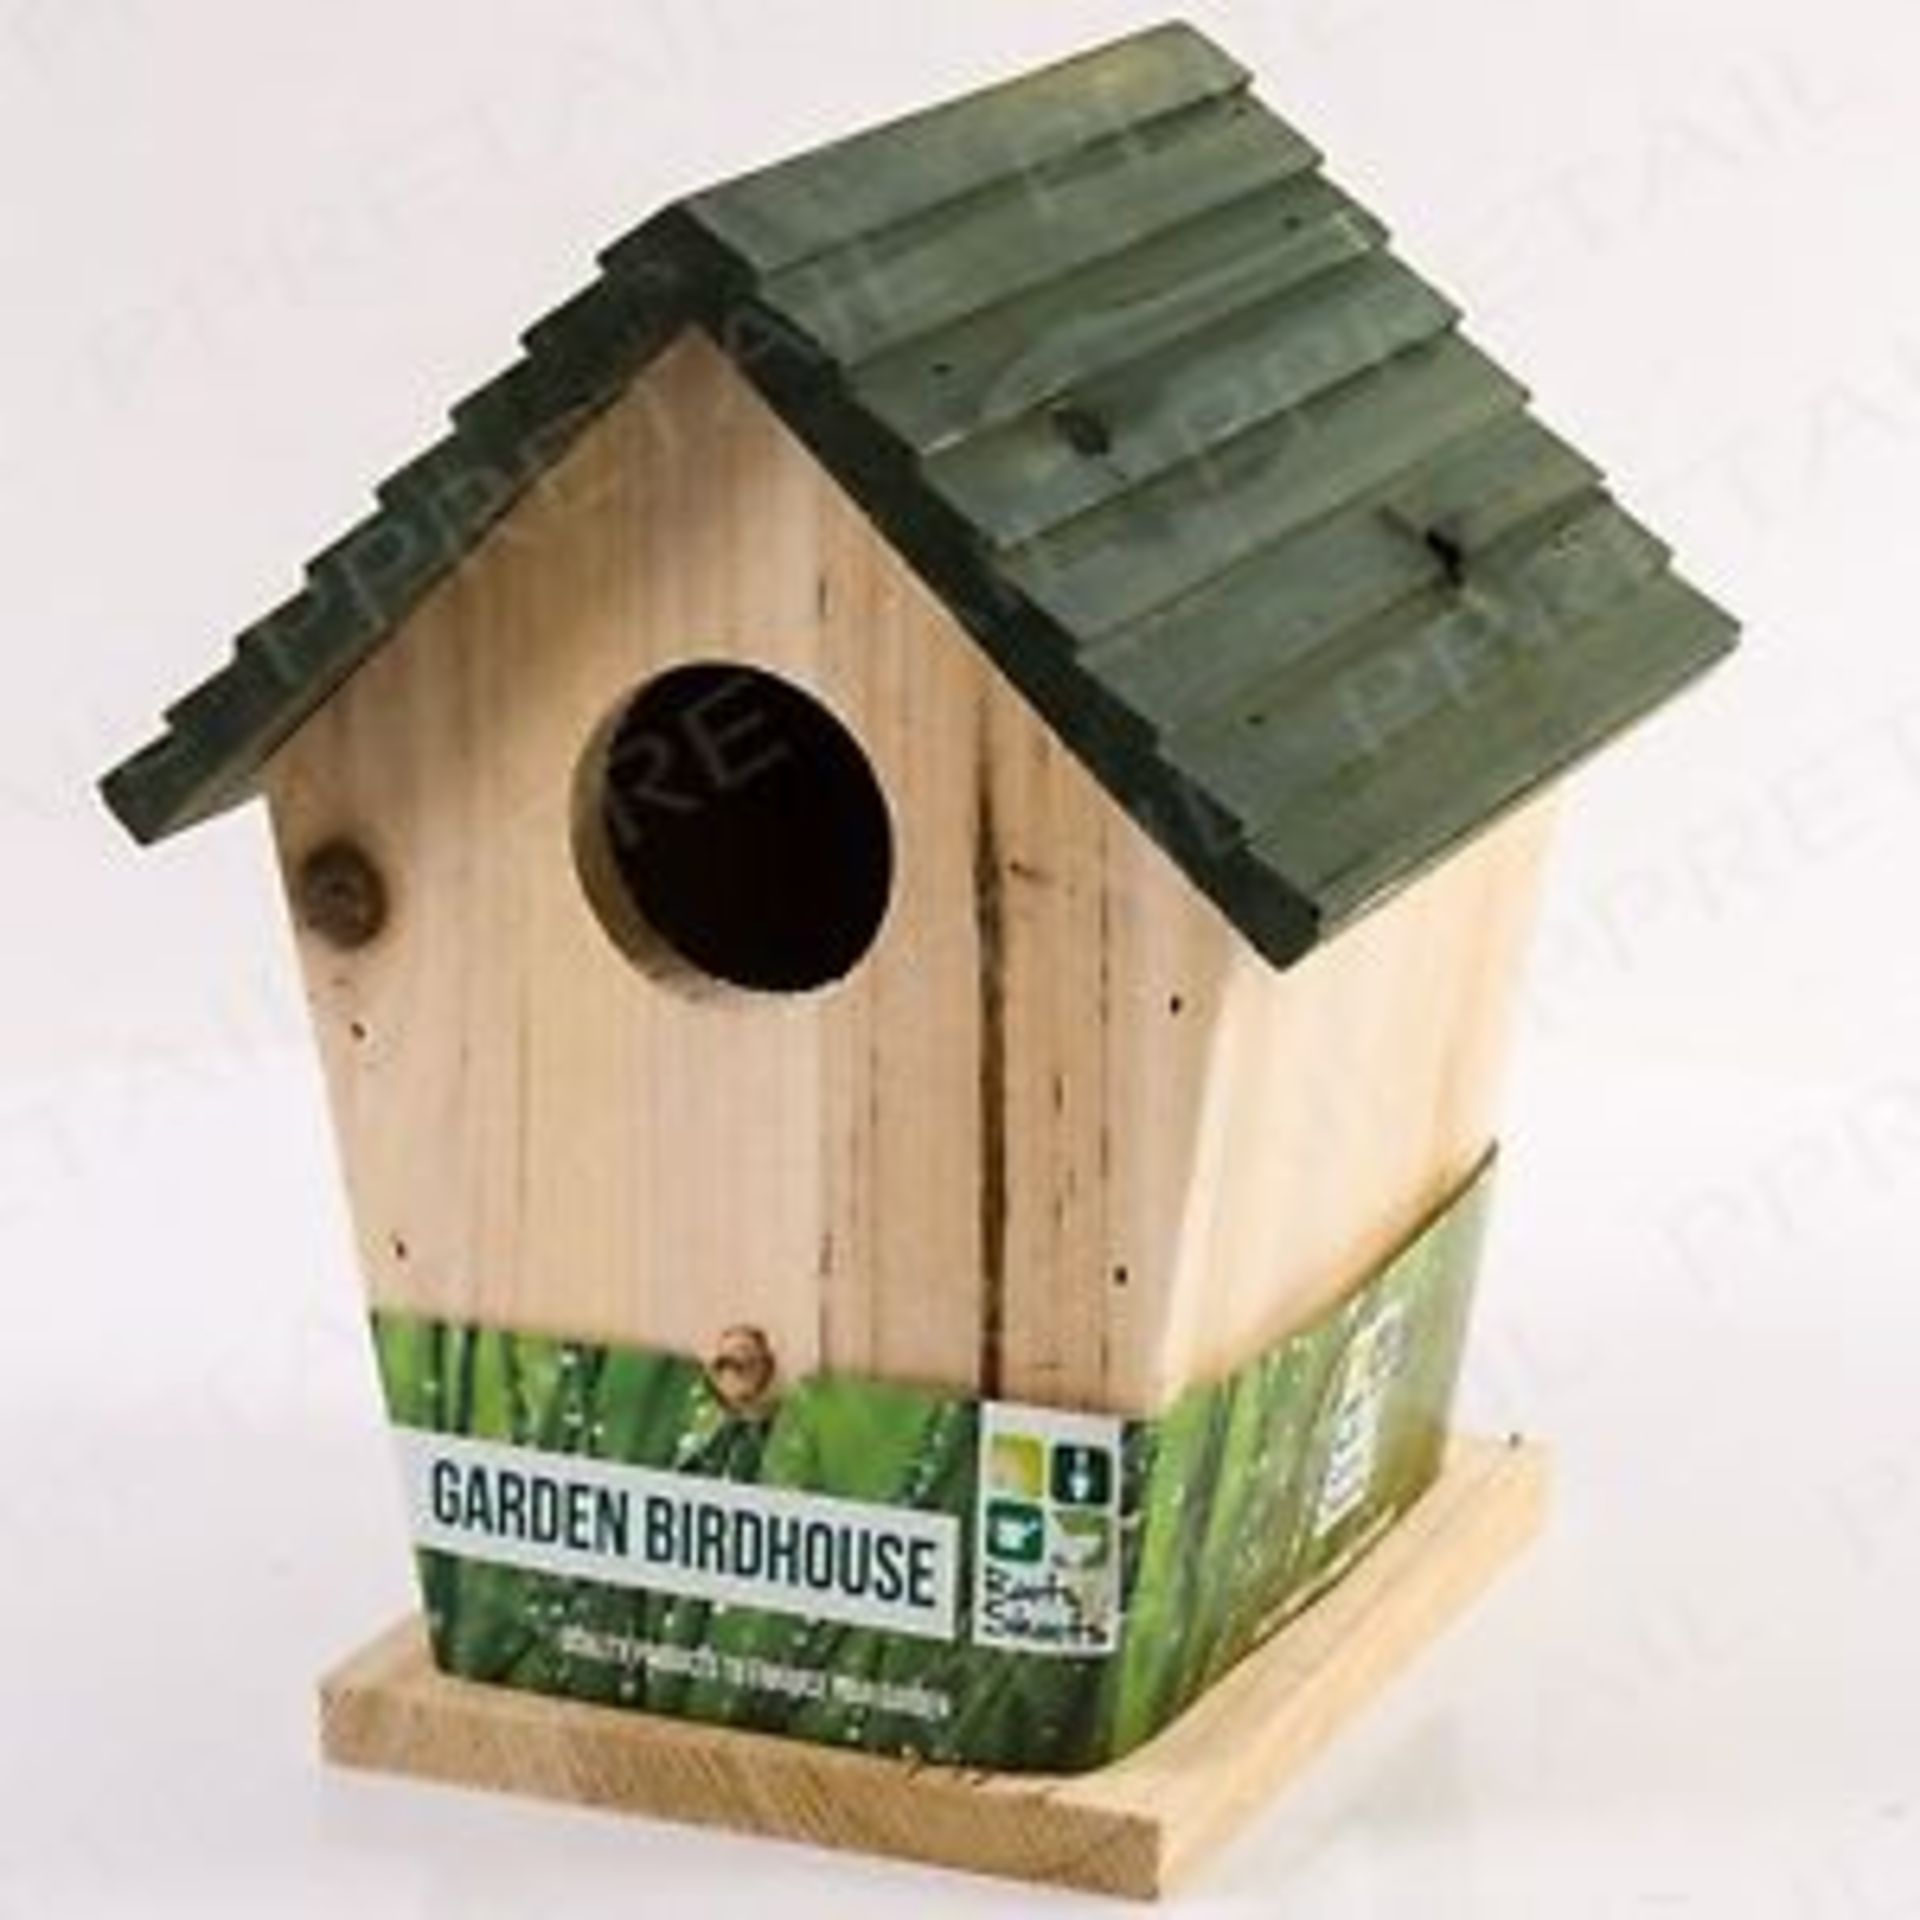 V *TRADE QTY* Brand New Wooden Birdhouse With Pitched Roof And Perch X 3 YOUR BID PRICE TO BE